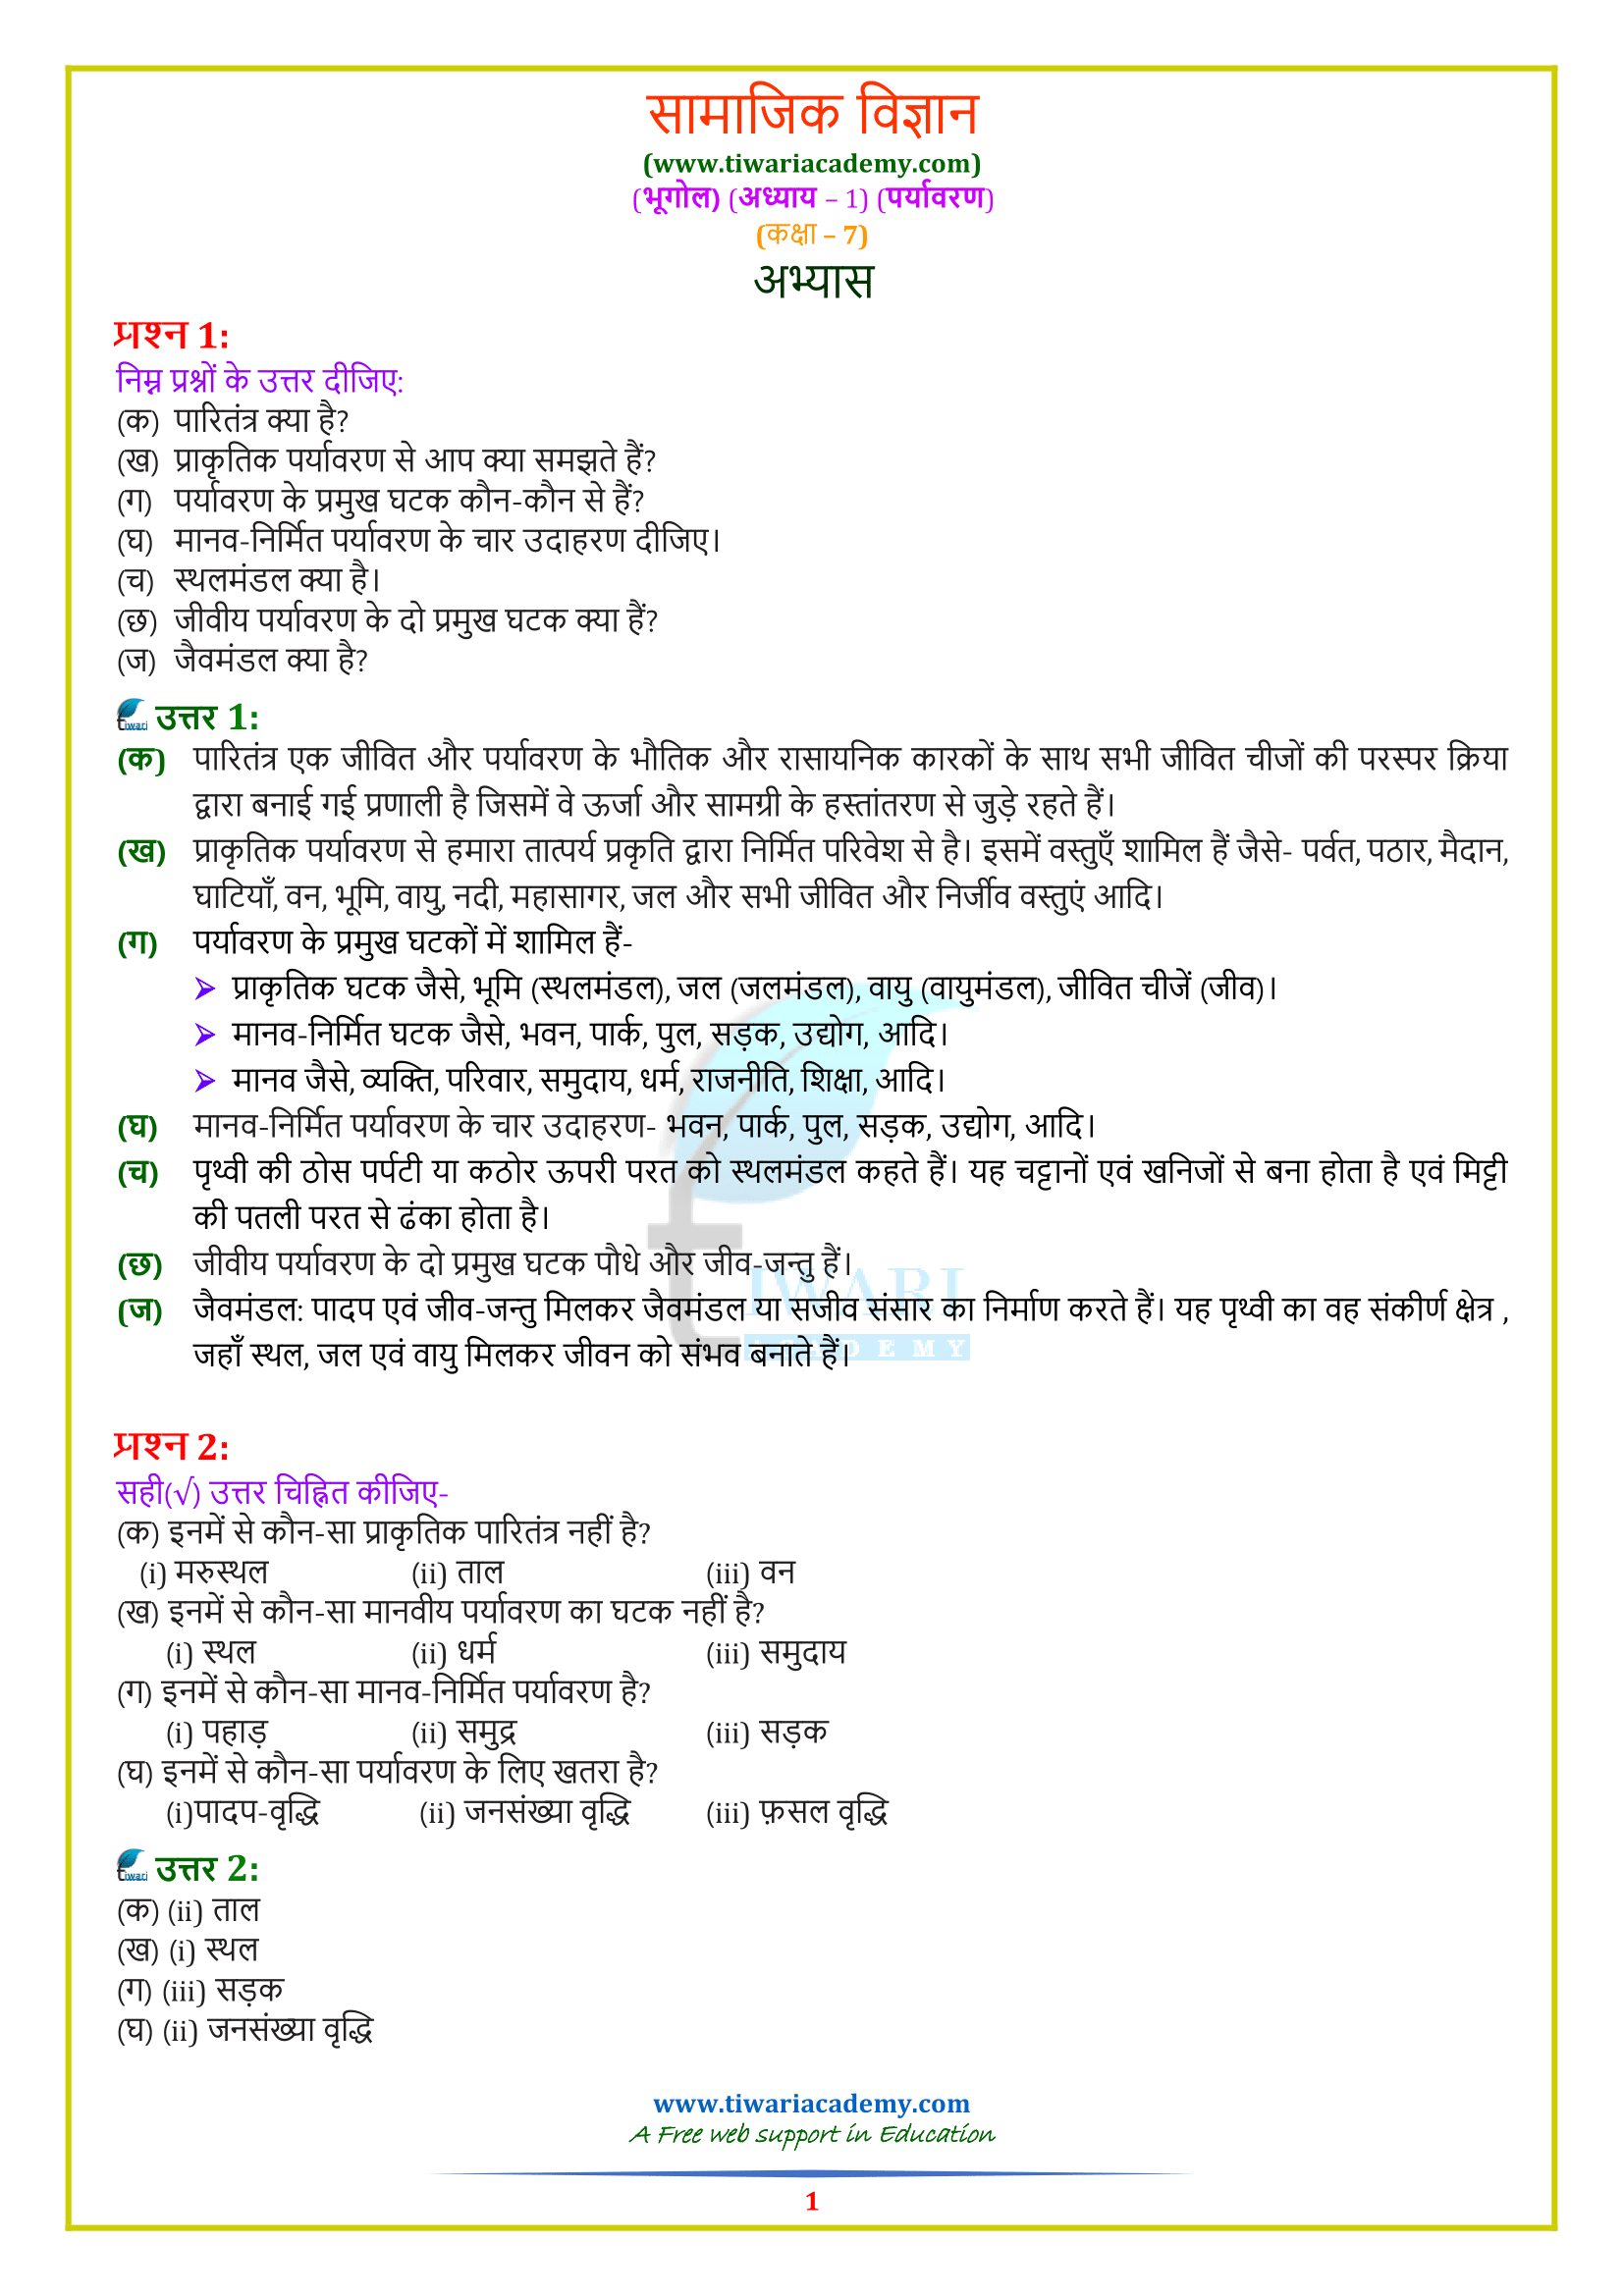 NCERT Solutions for Class 7 Geography chapter 1 Hindi Medium